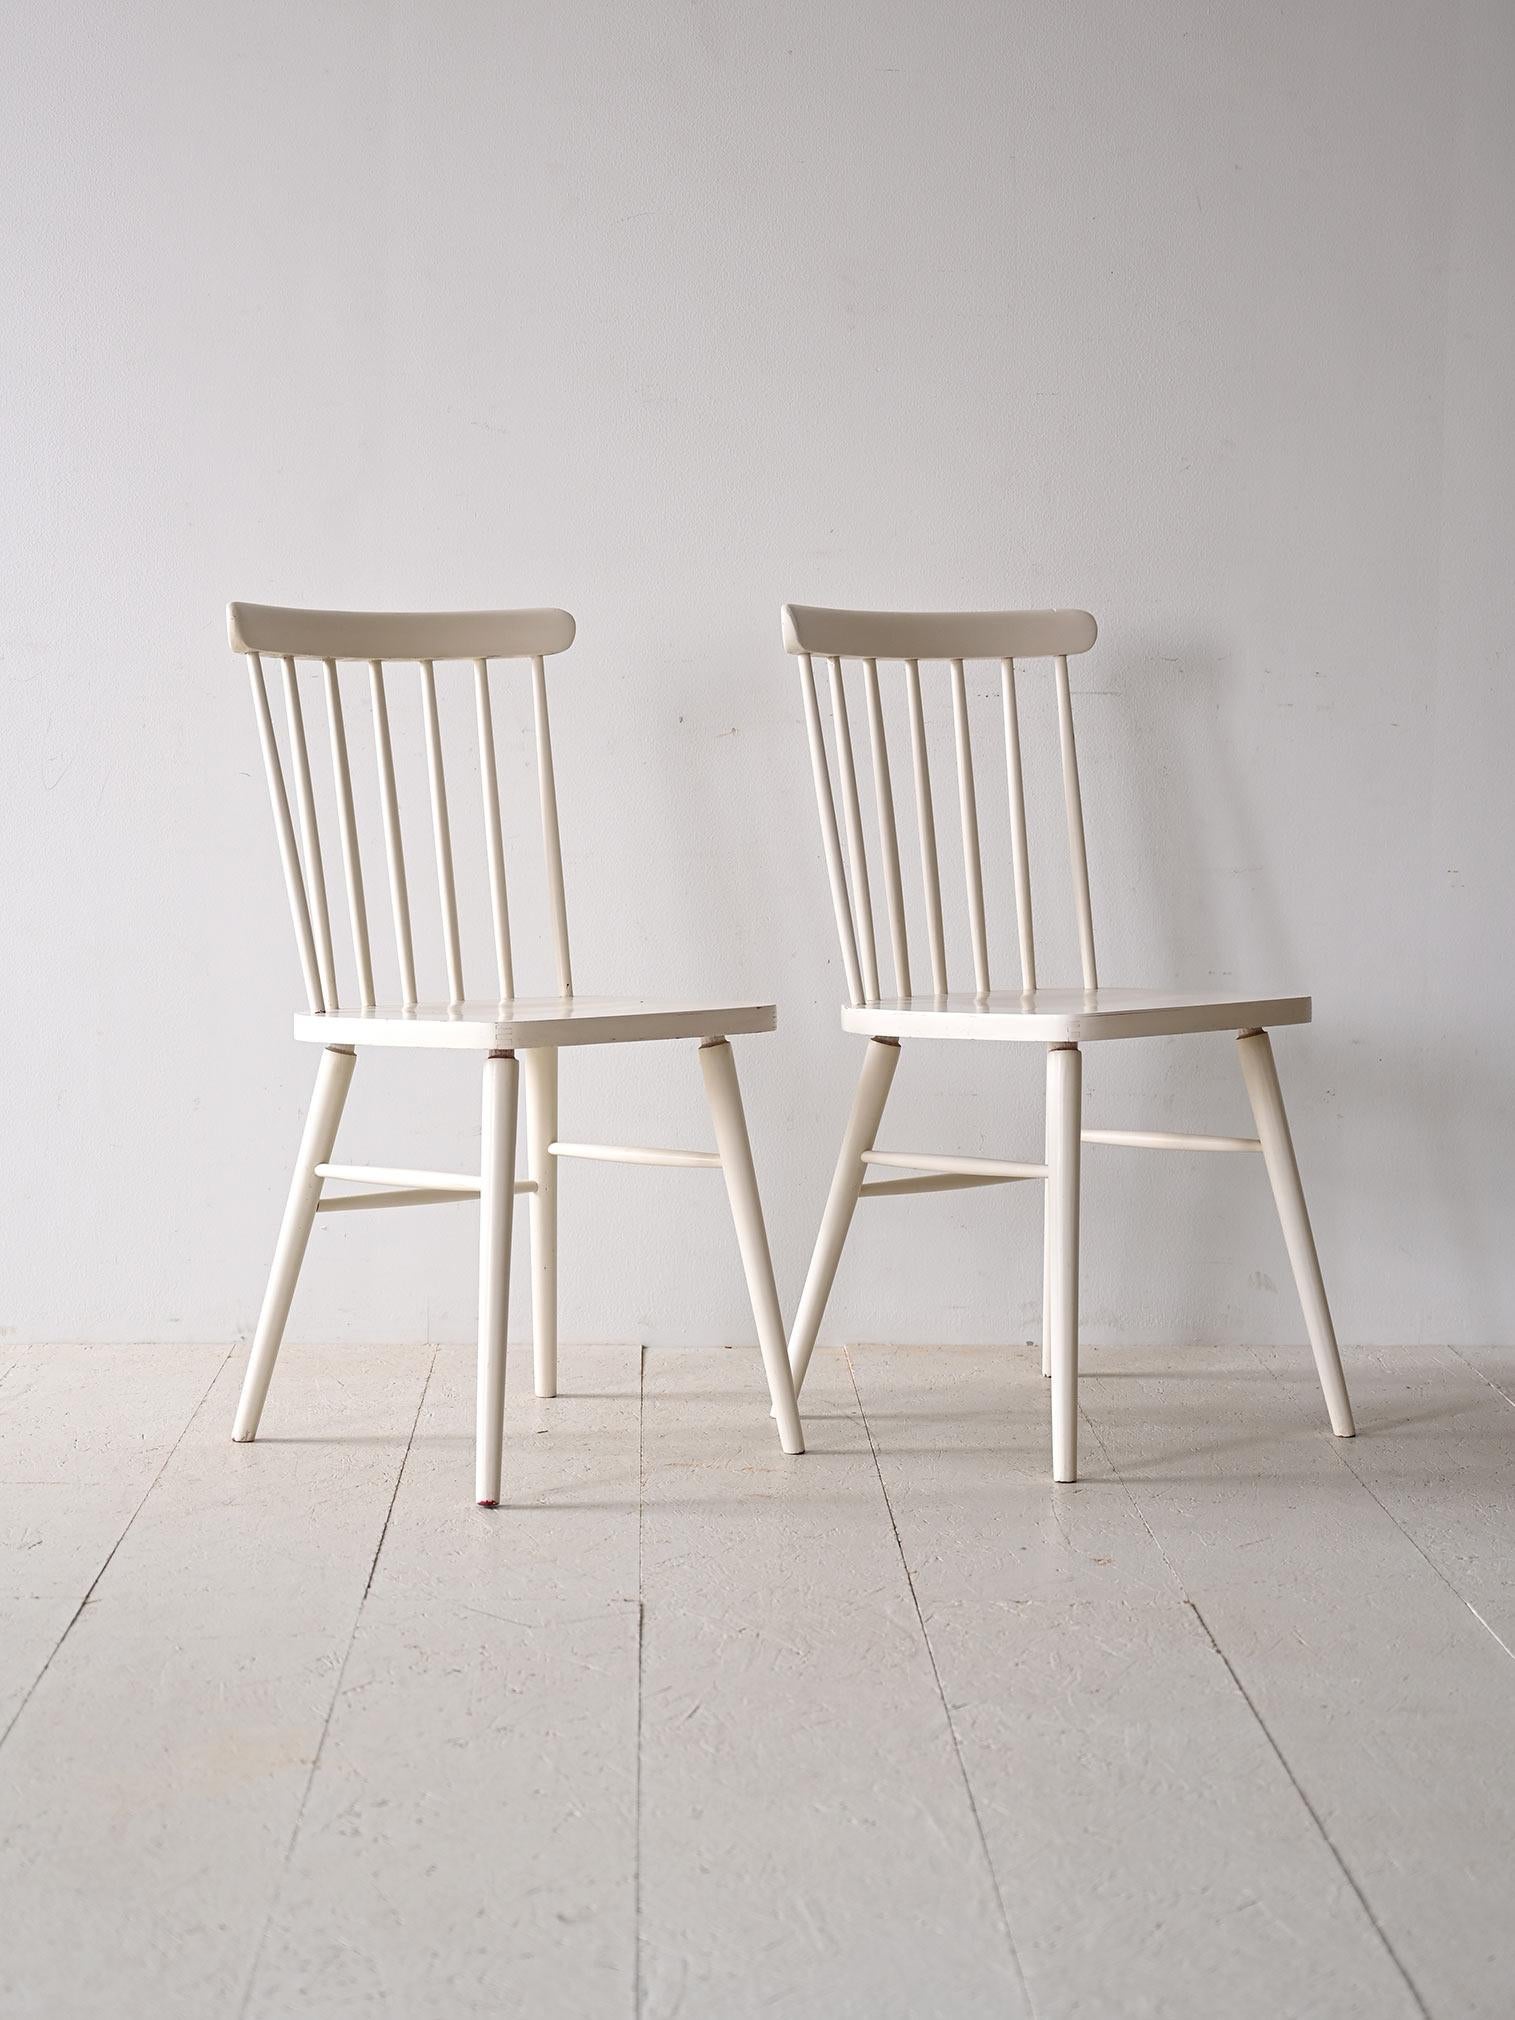 Pair of two original vintage wooden chairs.

This seating model, which has become known worldwide, is still in production today as its design is extremely current. It features minimal, elegant lines and an ergonomic seat thanks to the contoured